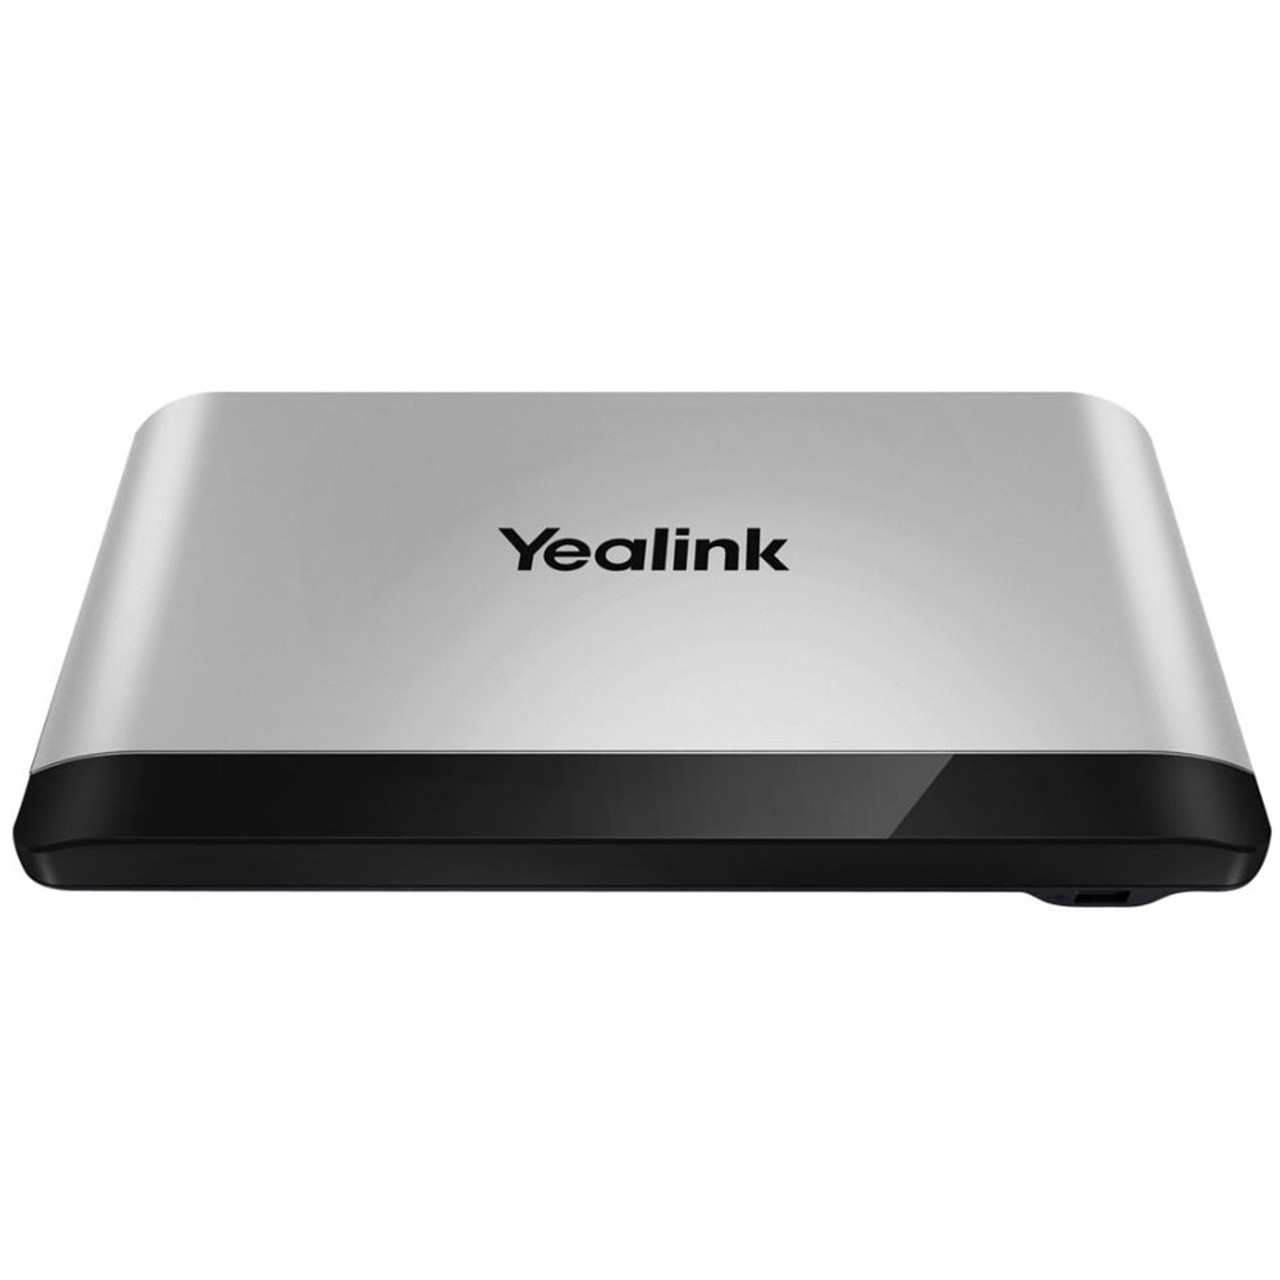 Yealink VC880 24-Site 1080p Full HD Video Conferencing System